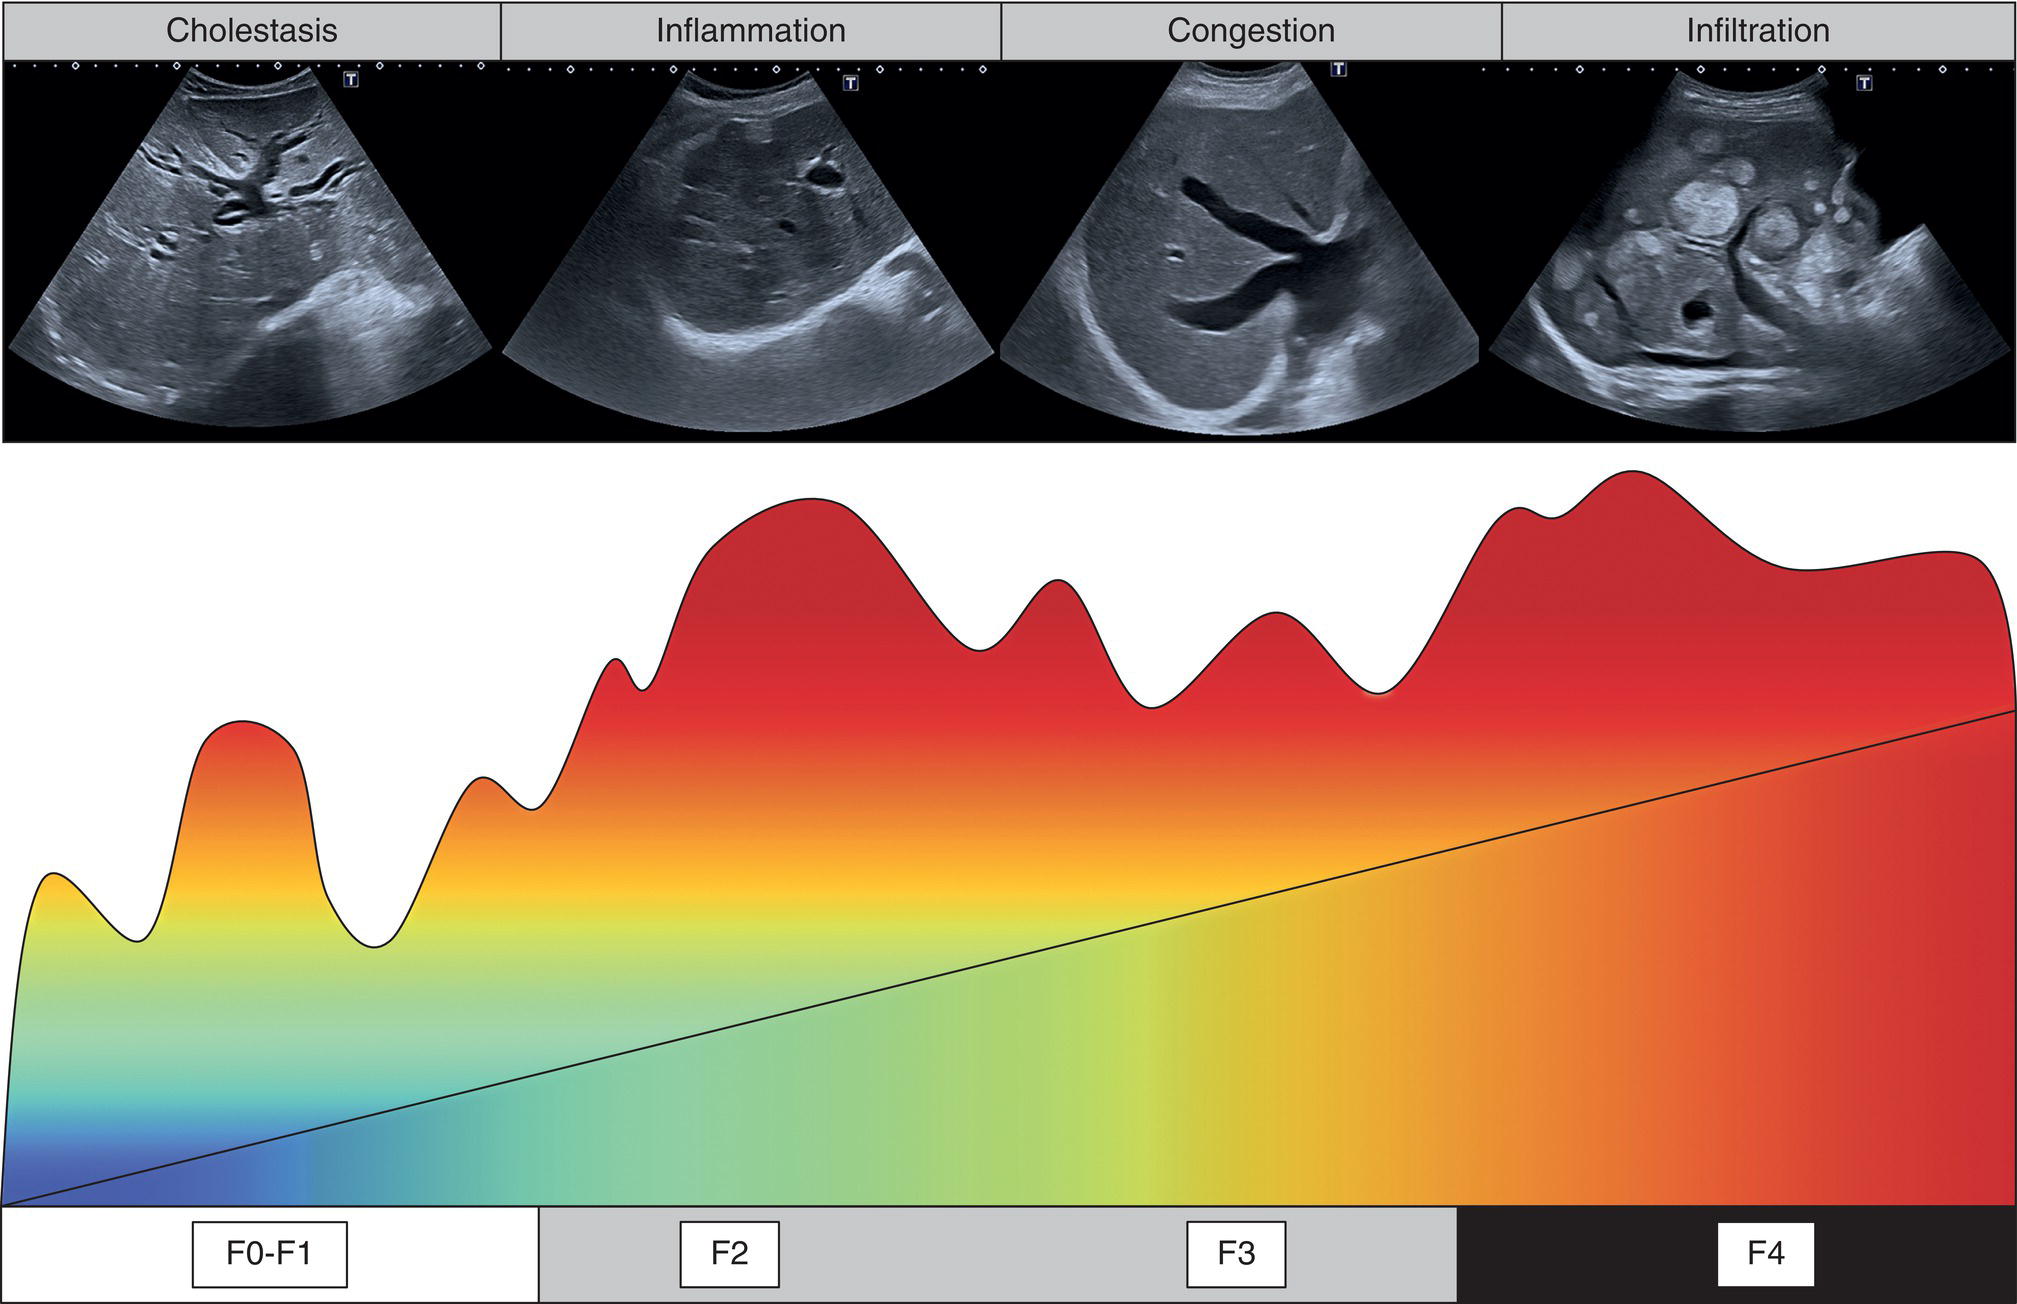 Four scan images and a elastography scale. The scan images depict cholestasis, inflammation, congestion, and infiltration. The trend is increasing over the four stages from F 0 to F 4.